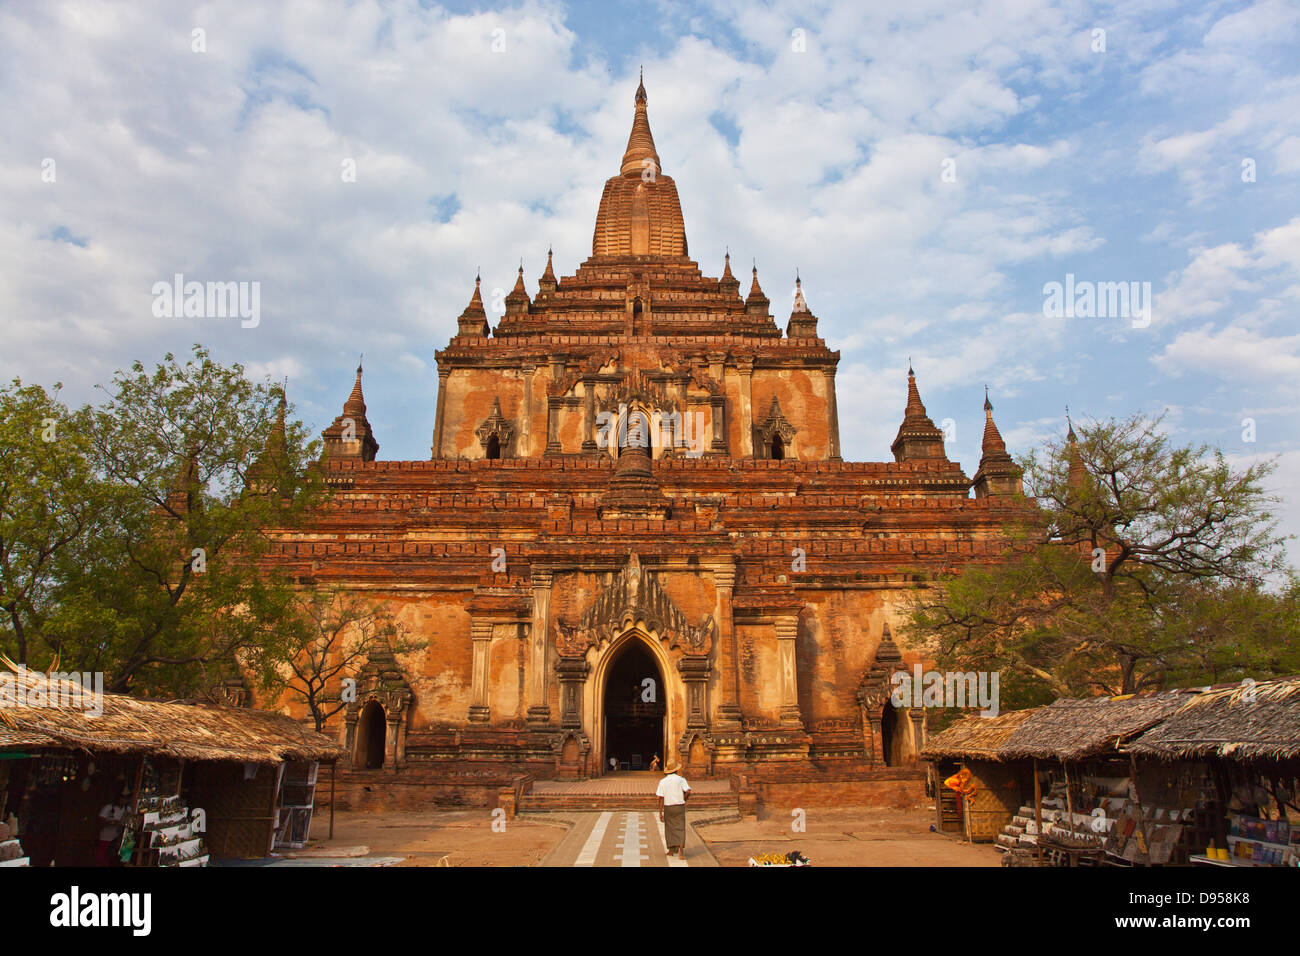 The SULAMANI PHATO was completed by King Narapatisithu in 1211 AD - BAGAN, MYANMAR Stock Photo